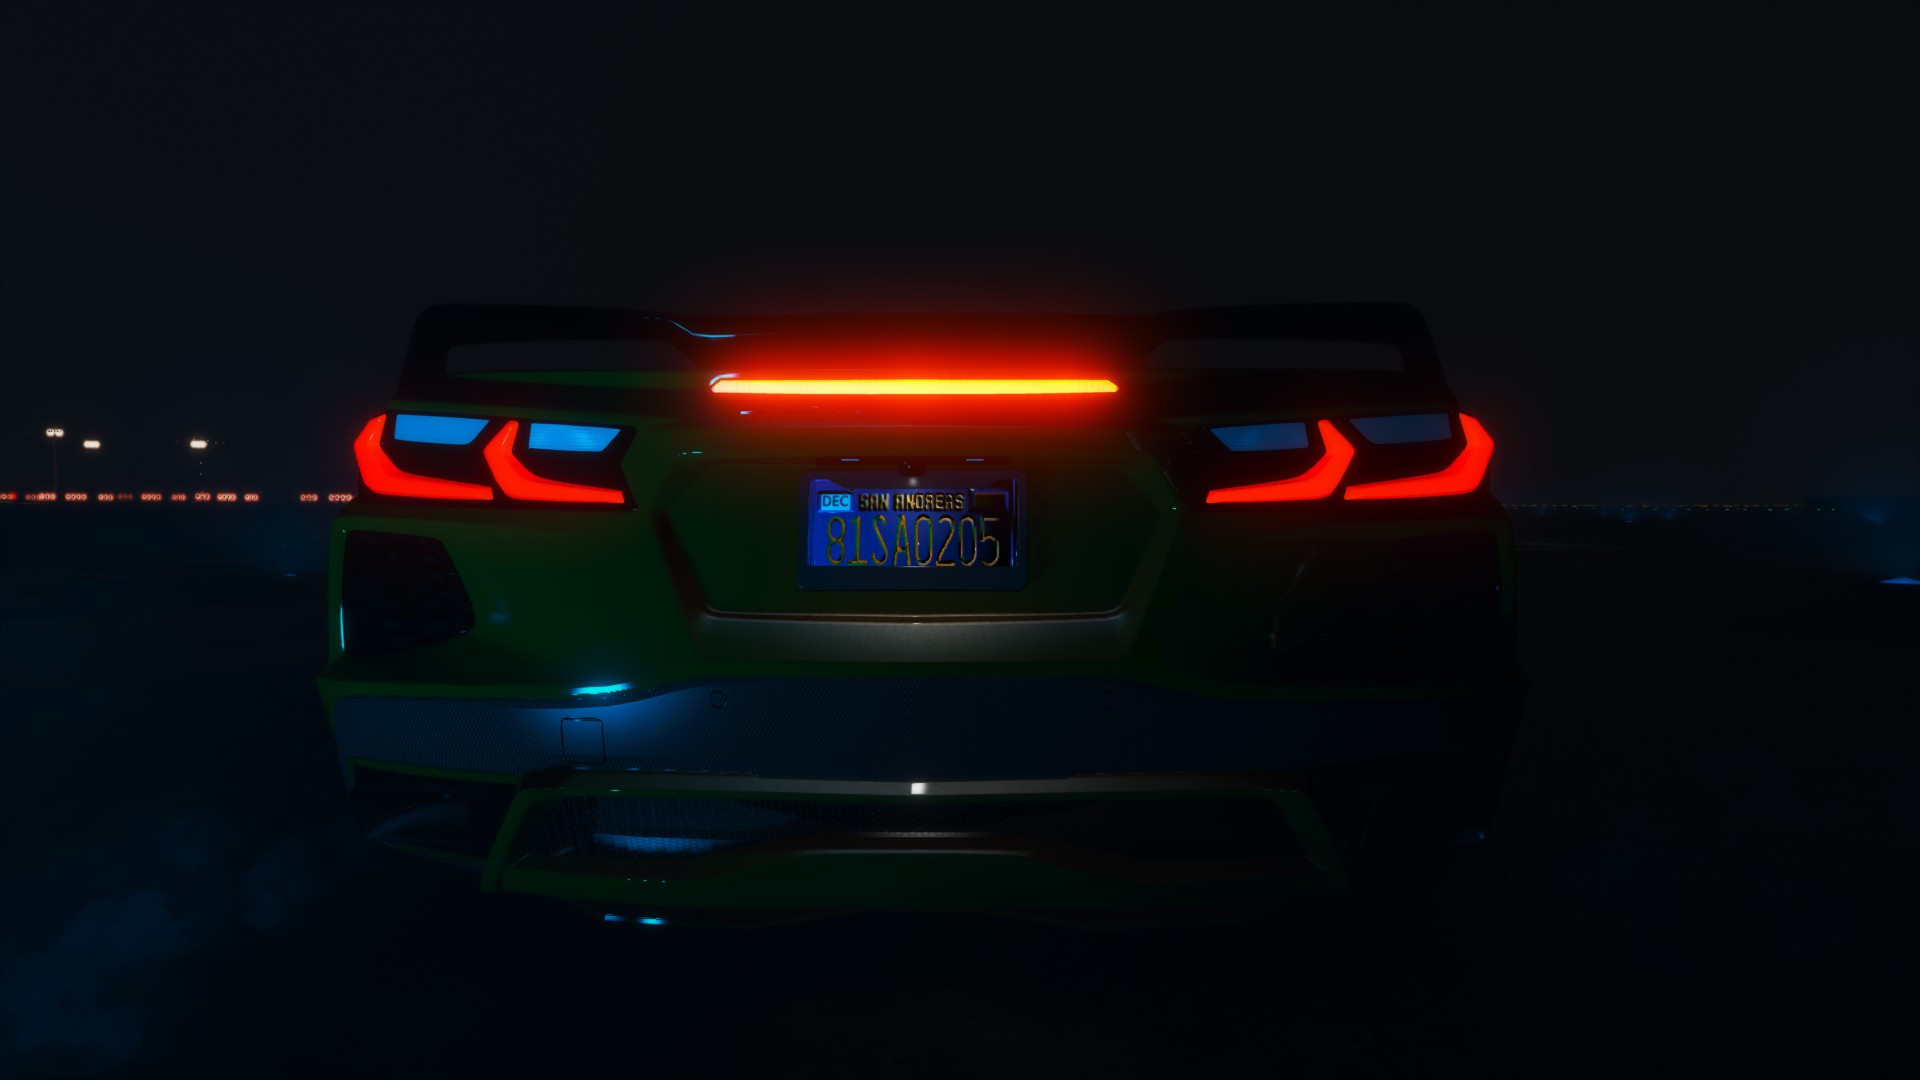 General 1920x1080 Grand Theft Auto V Corvette night lights car licence plates CGI video games taillights